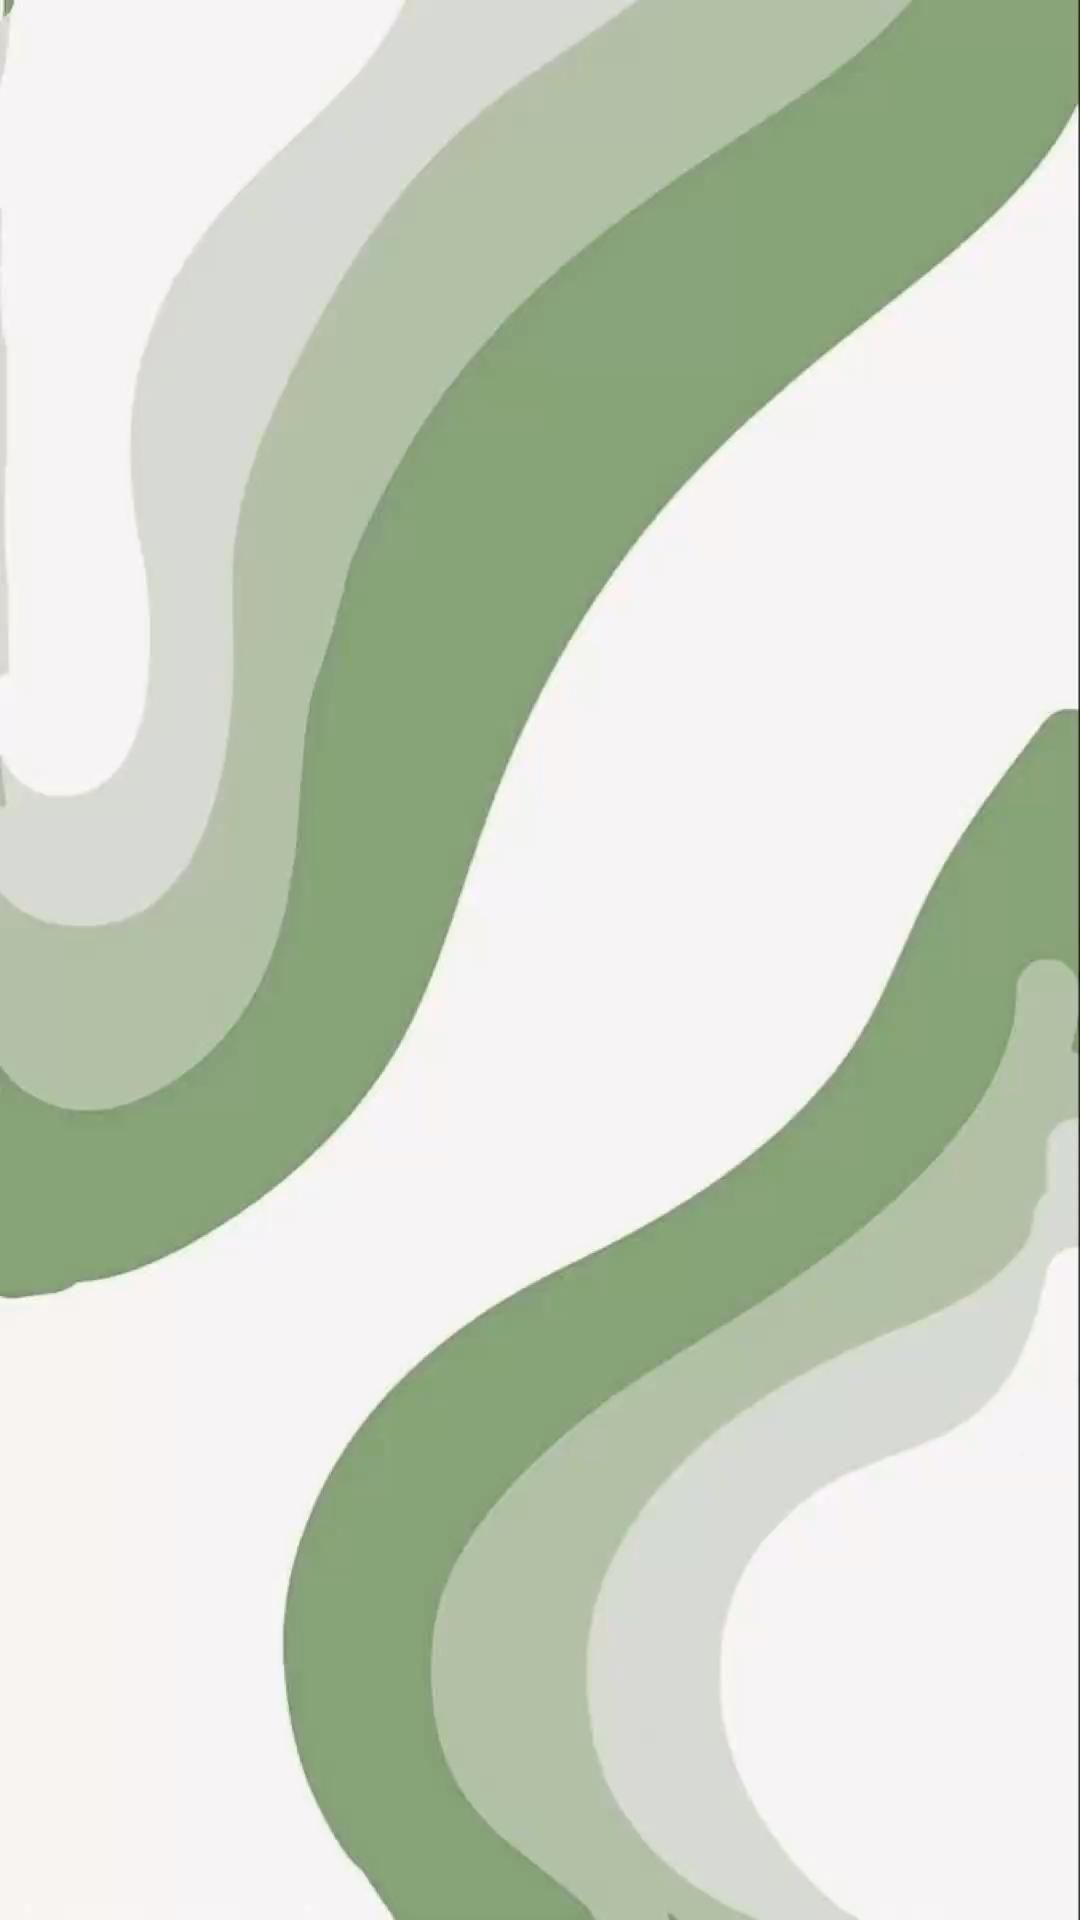 A green and white abstract design - Sage green